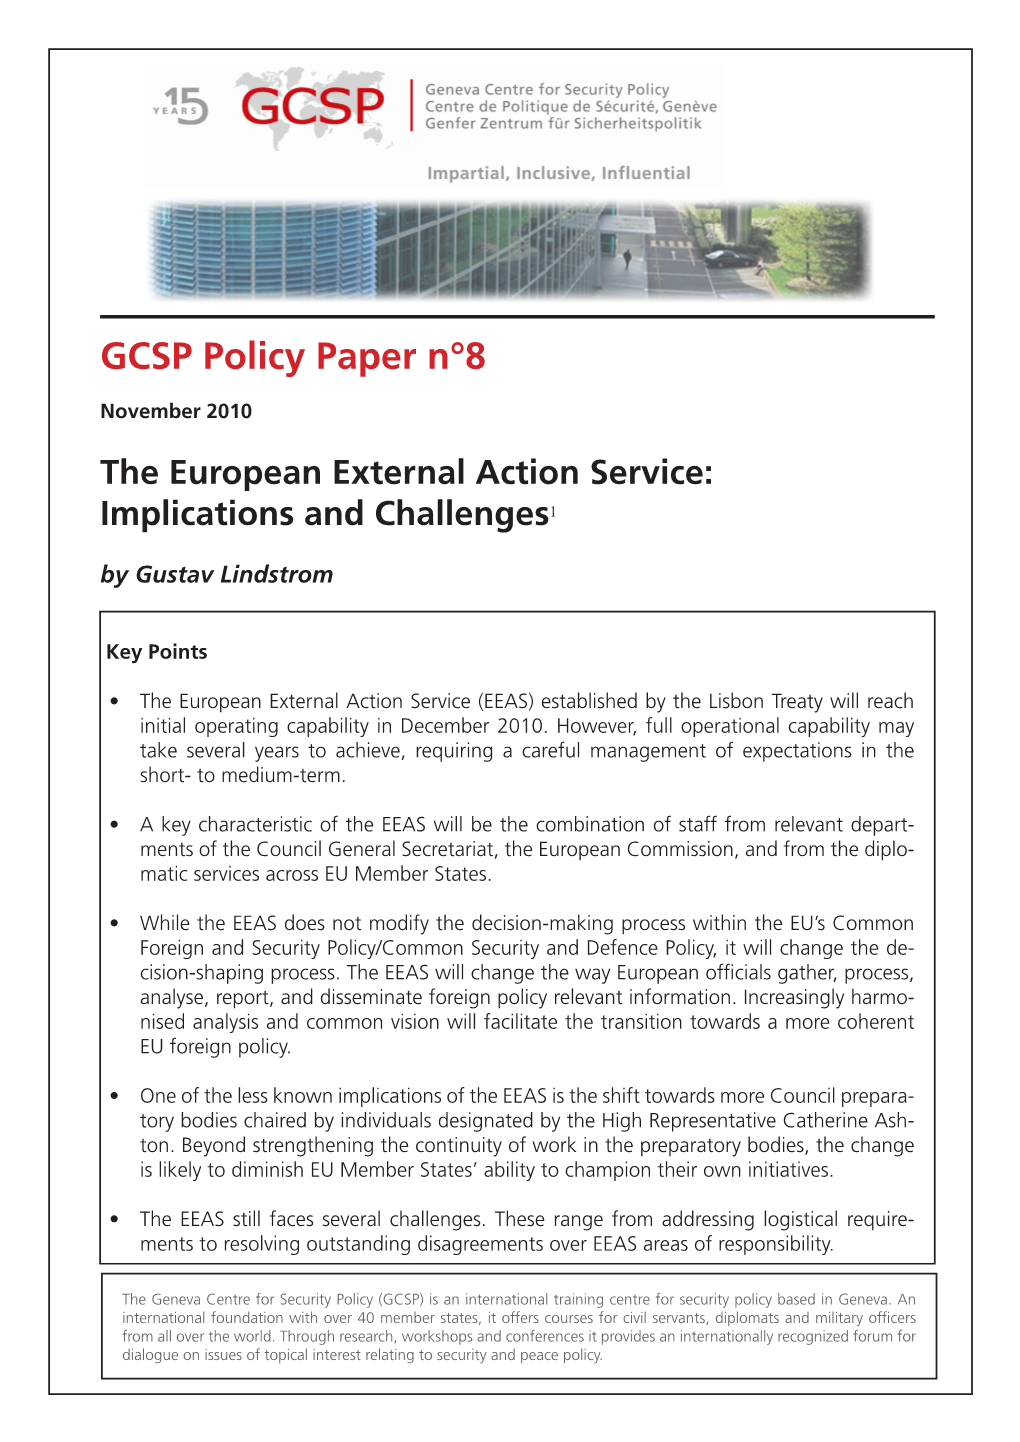 GCSP Policy Paper N°8